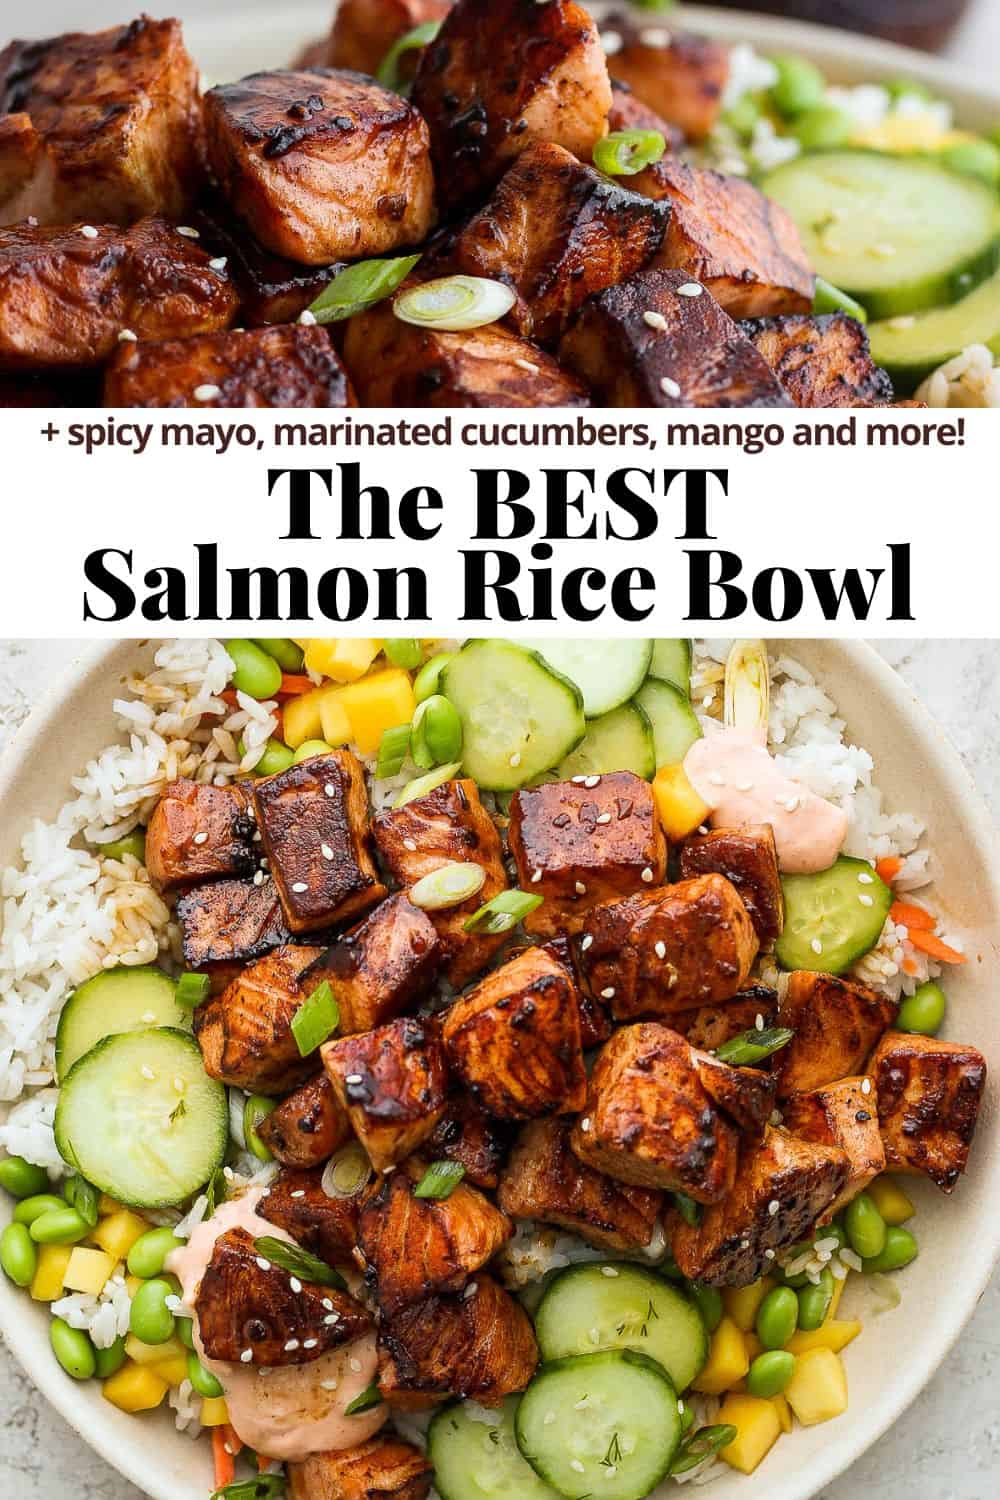 A Pinterest image that shows a close up of the cooked salmon on top of the rice bowl as the top image, "the best salmon rice bowl" title in the middle, and a full shot of the complete soy ginger salmon rice bowl on the bottom.